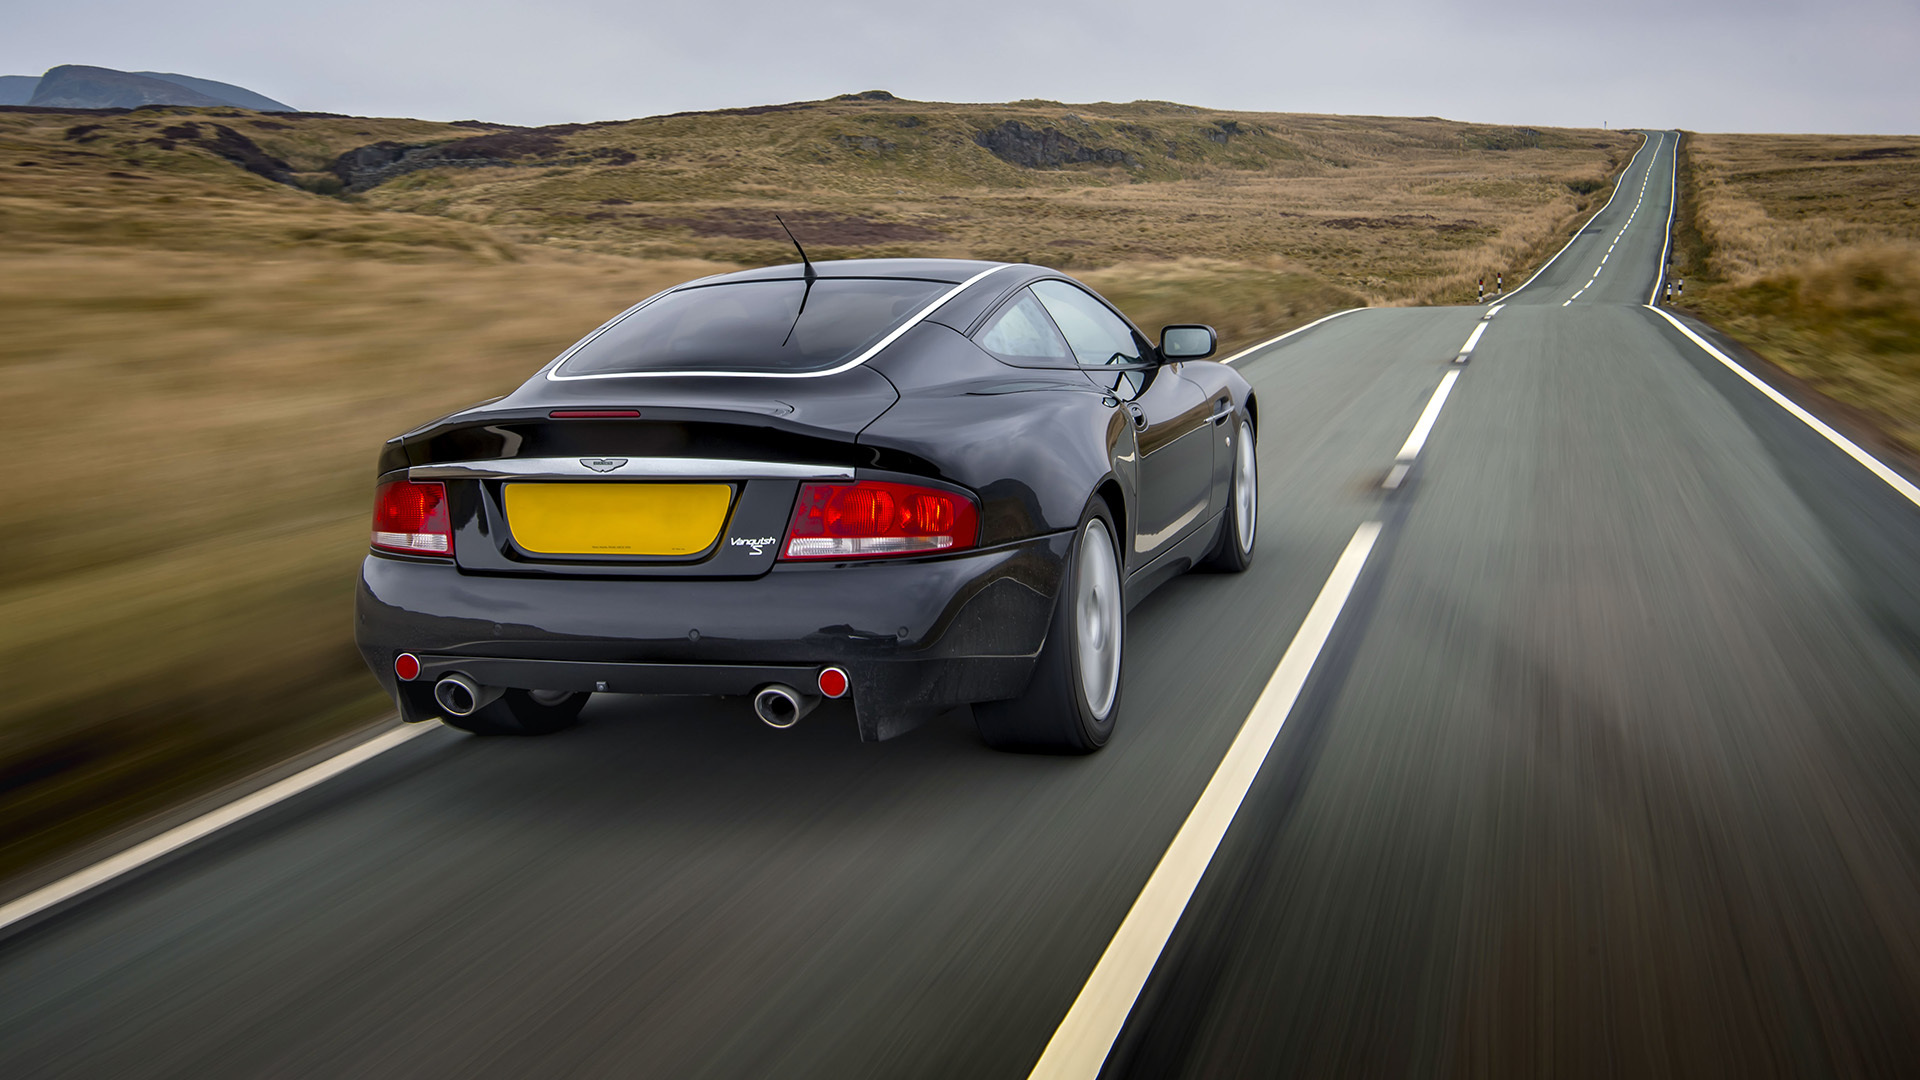 Rear view of a sleek black Aston Martin Vanquish S cruising on a scenic country road. 